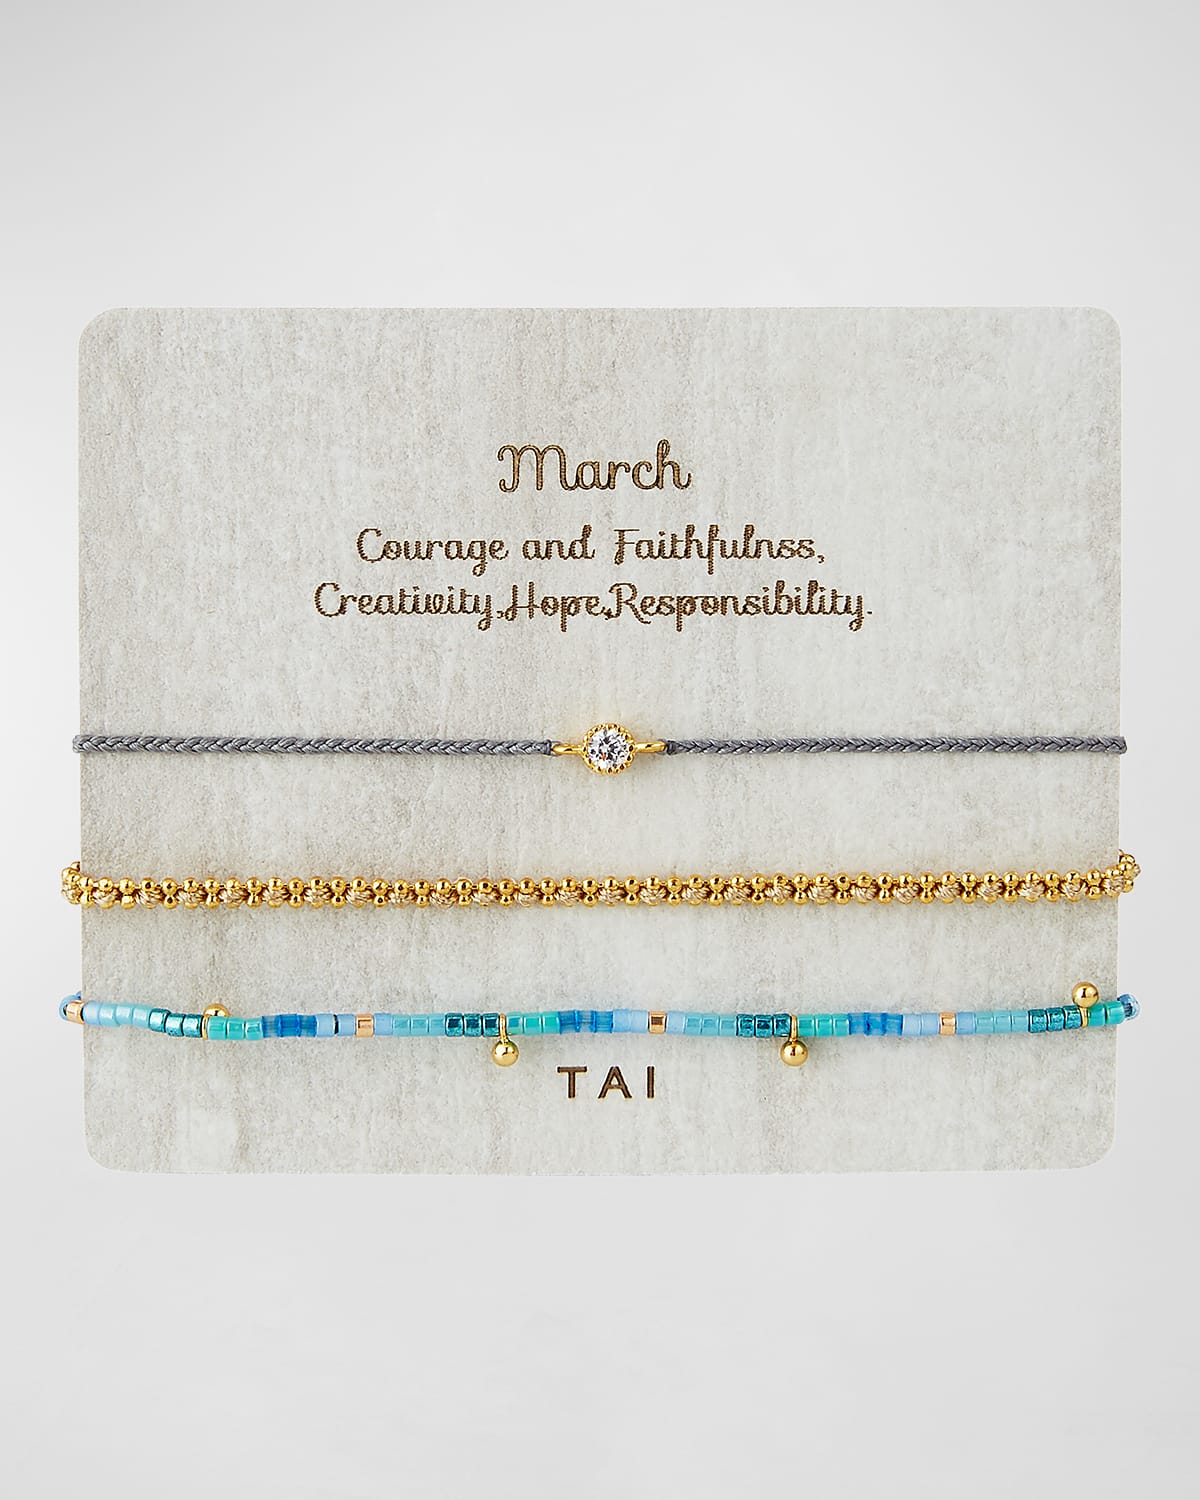 Tai Personalized Birthday Bracelets, Set Of 3 In March